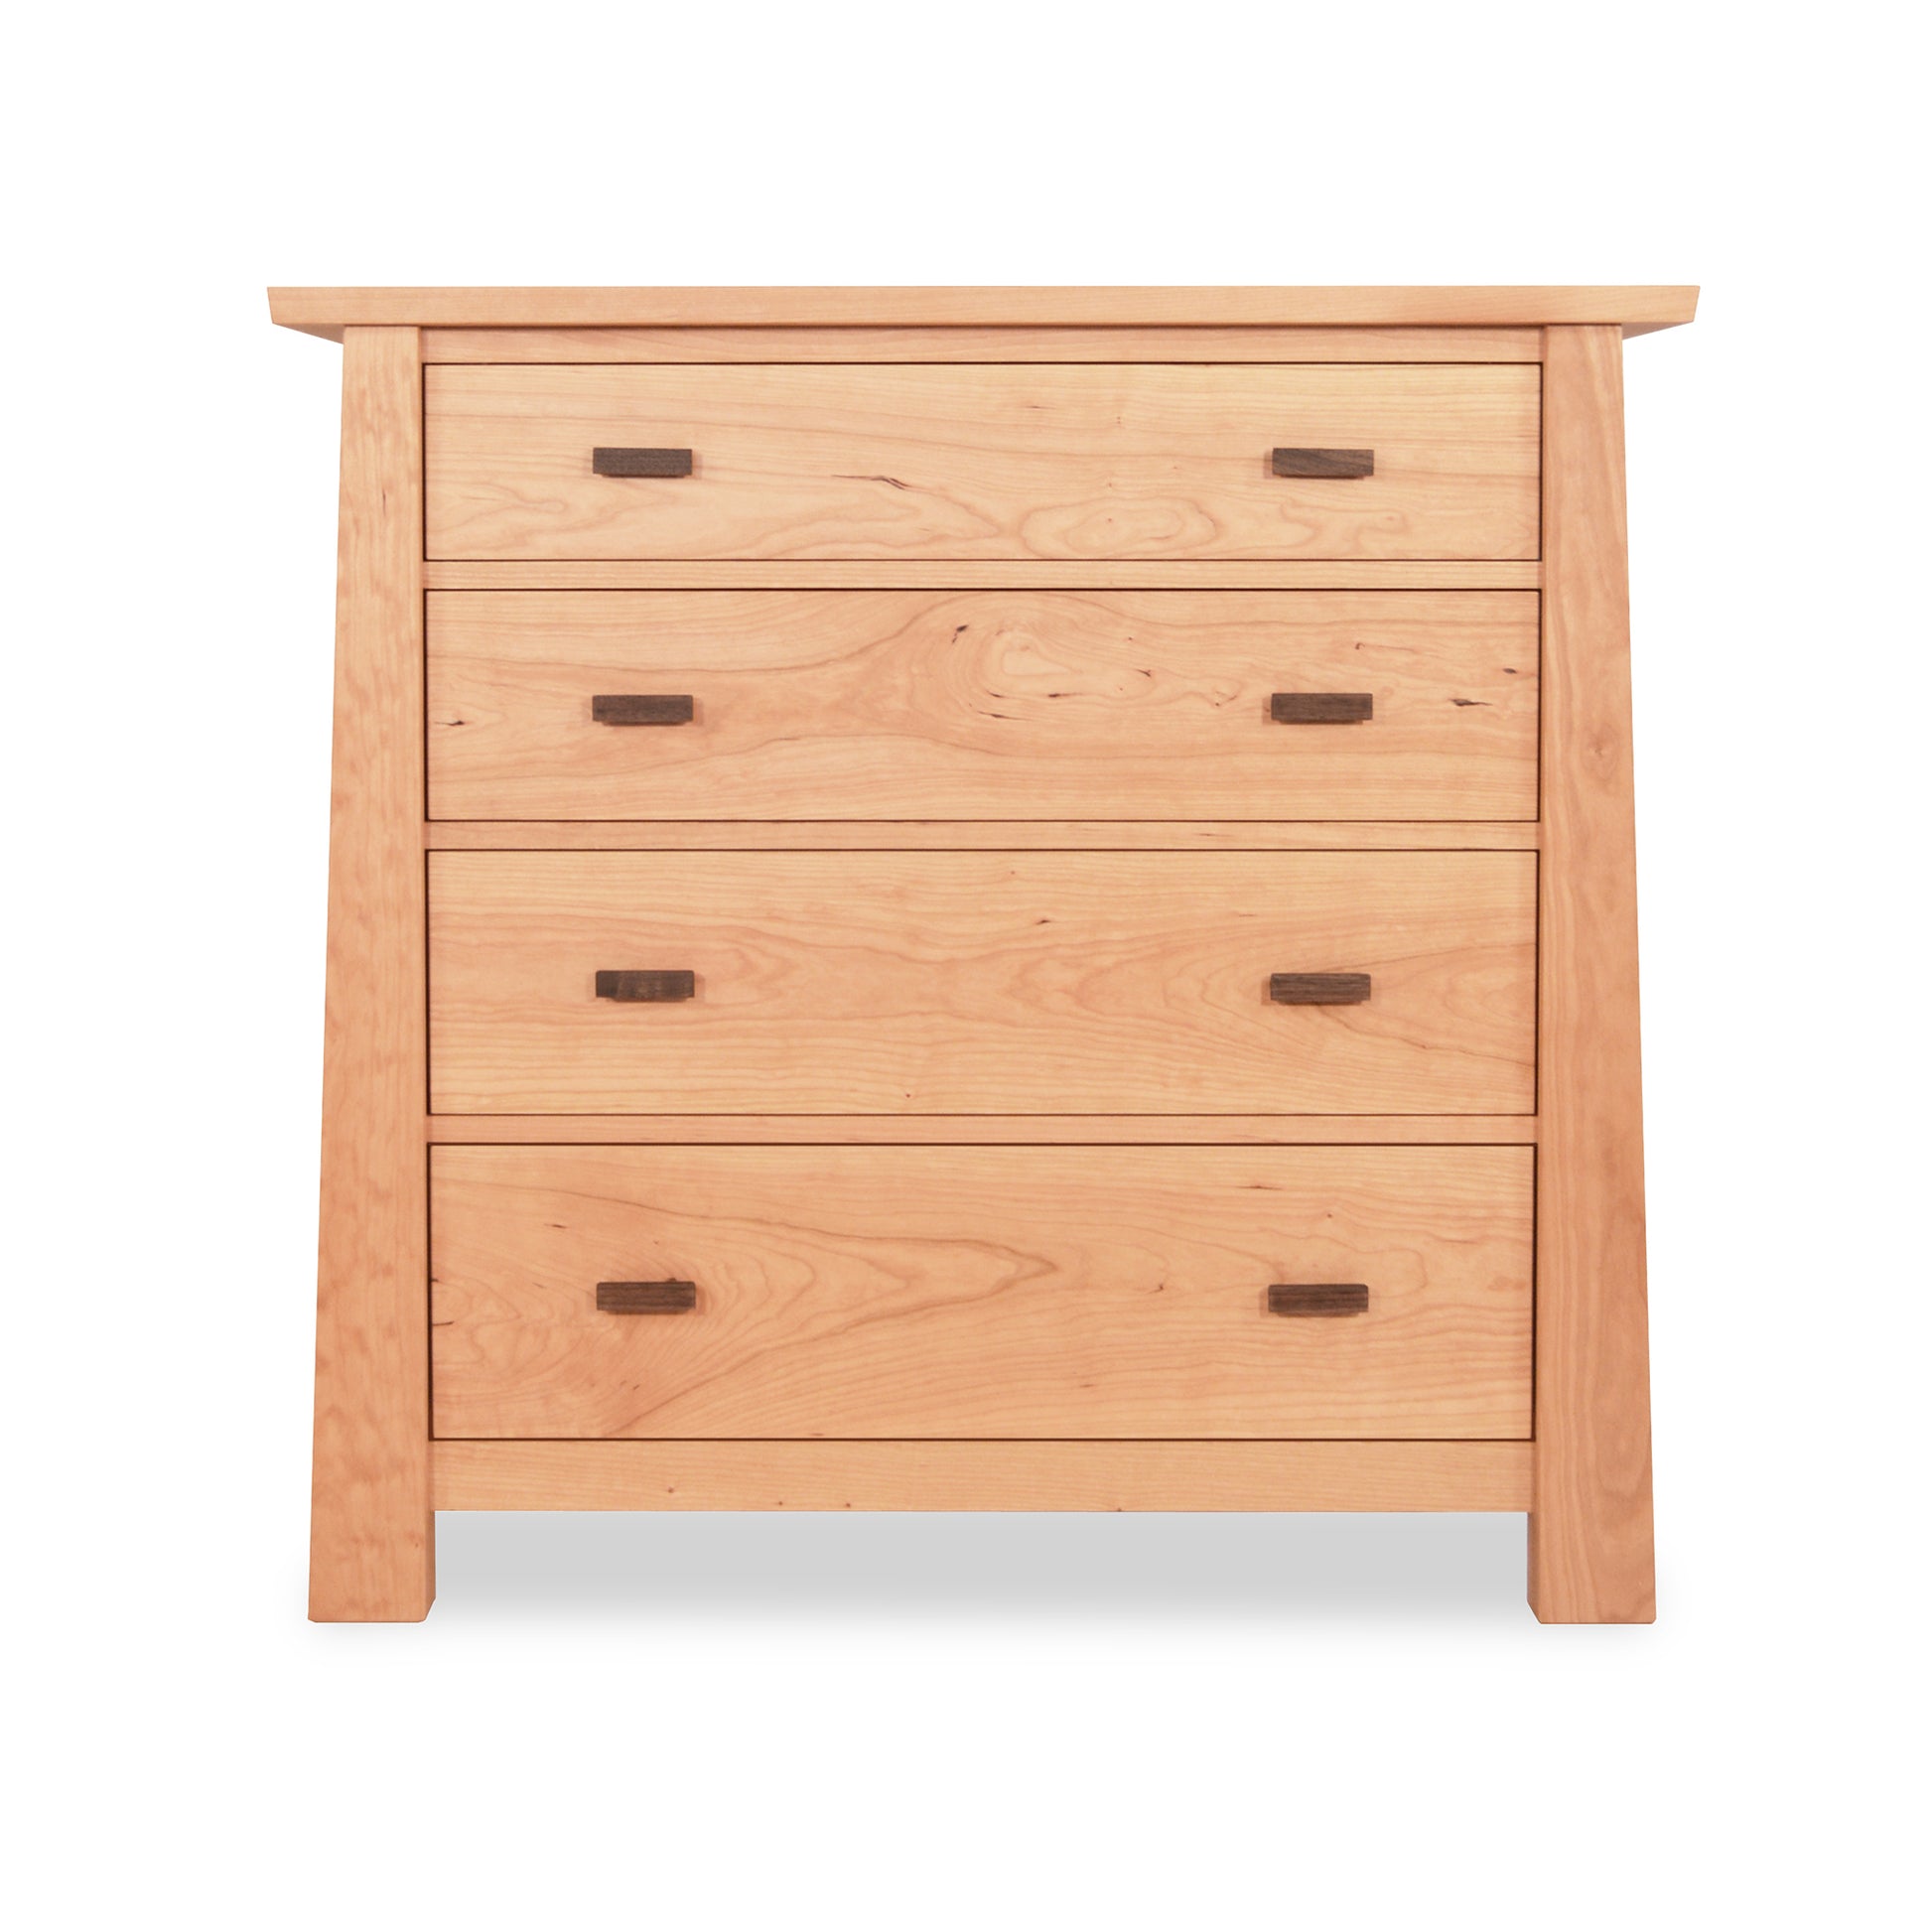 Sentence with replaced product:

A Maple Corner Woodworks Gamble 4-Drawer Chest, featuring four drawers with flat handles, against a plain white background. The furniture displays a natural wood grain texture.